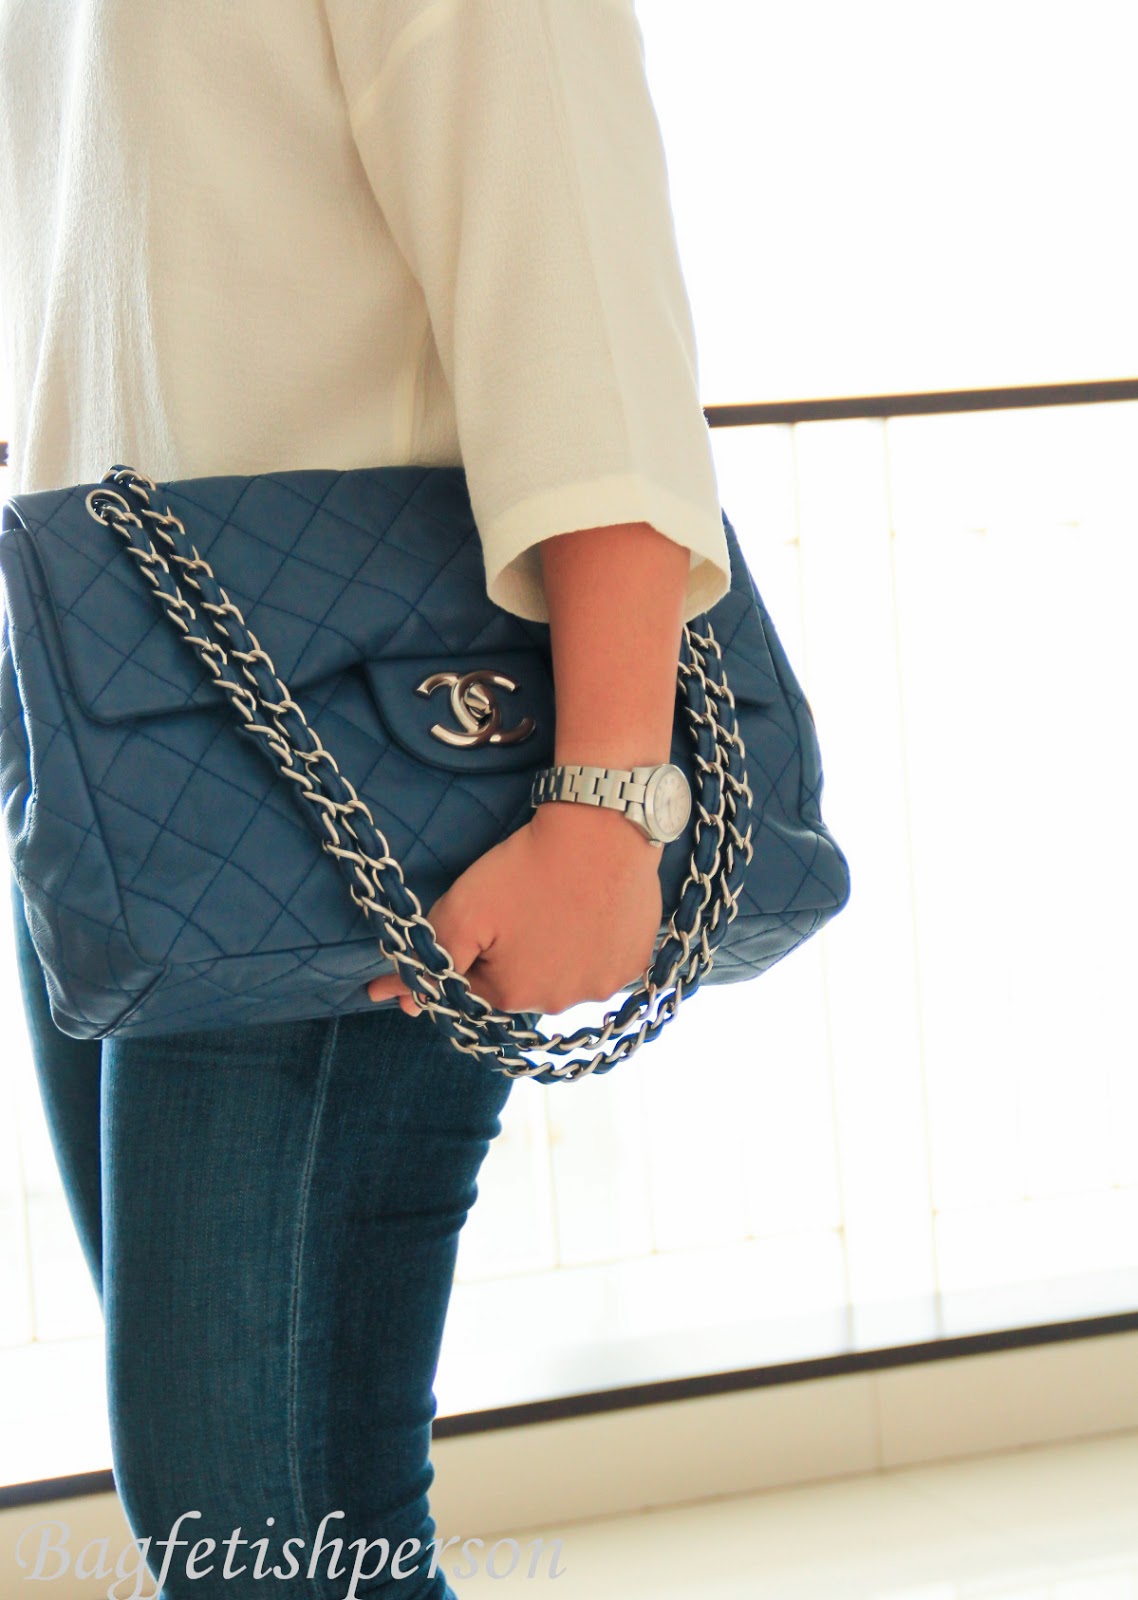 bagfetishperson: Bag of the day: Chanel Maxi Soft Caviar